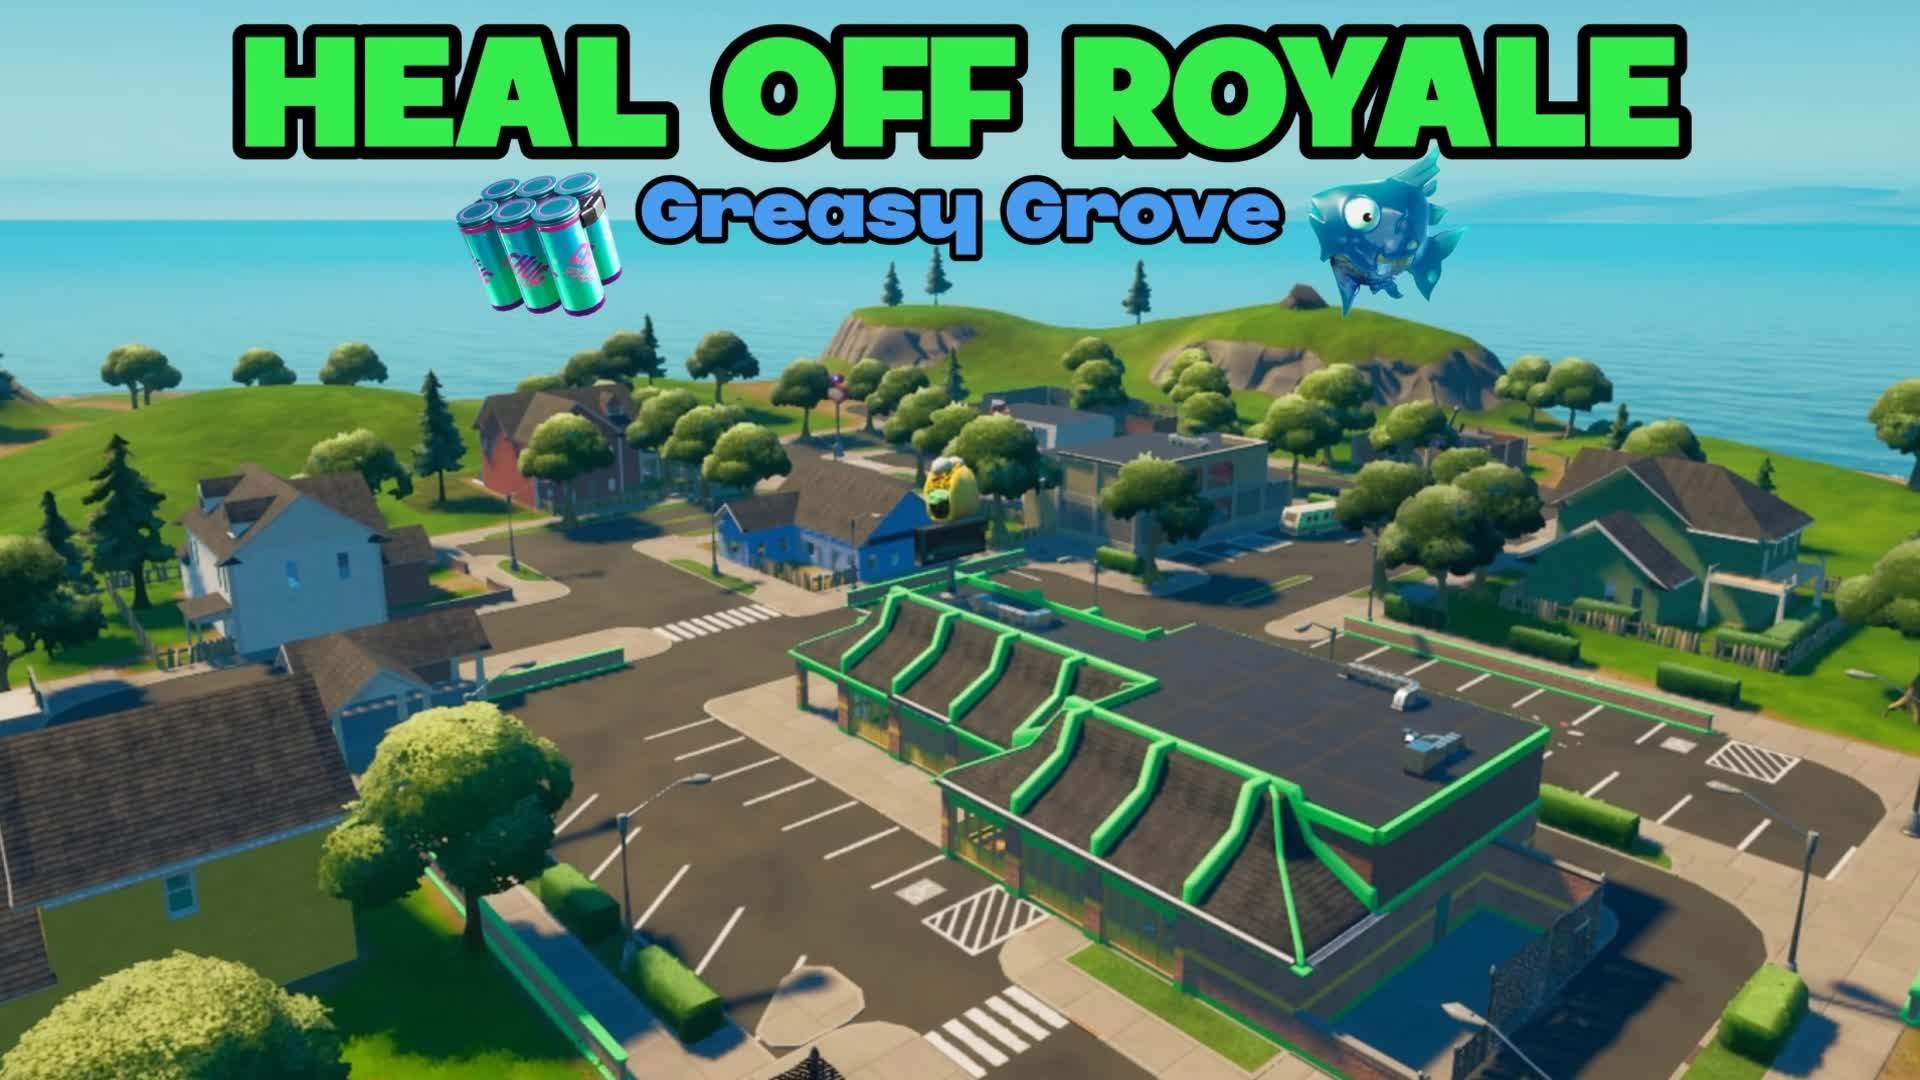 Heal off royale